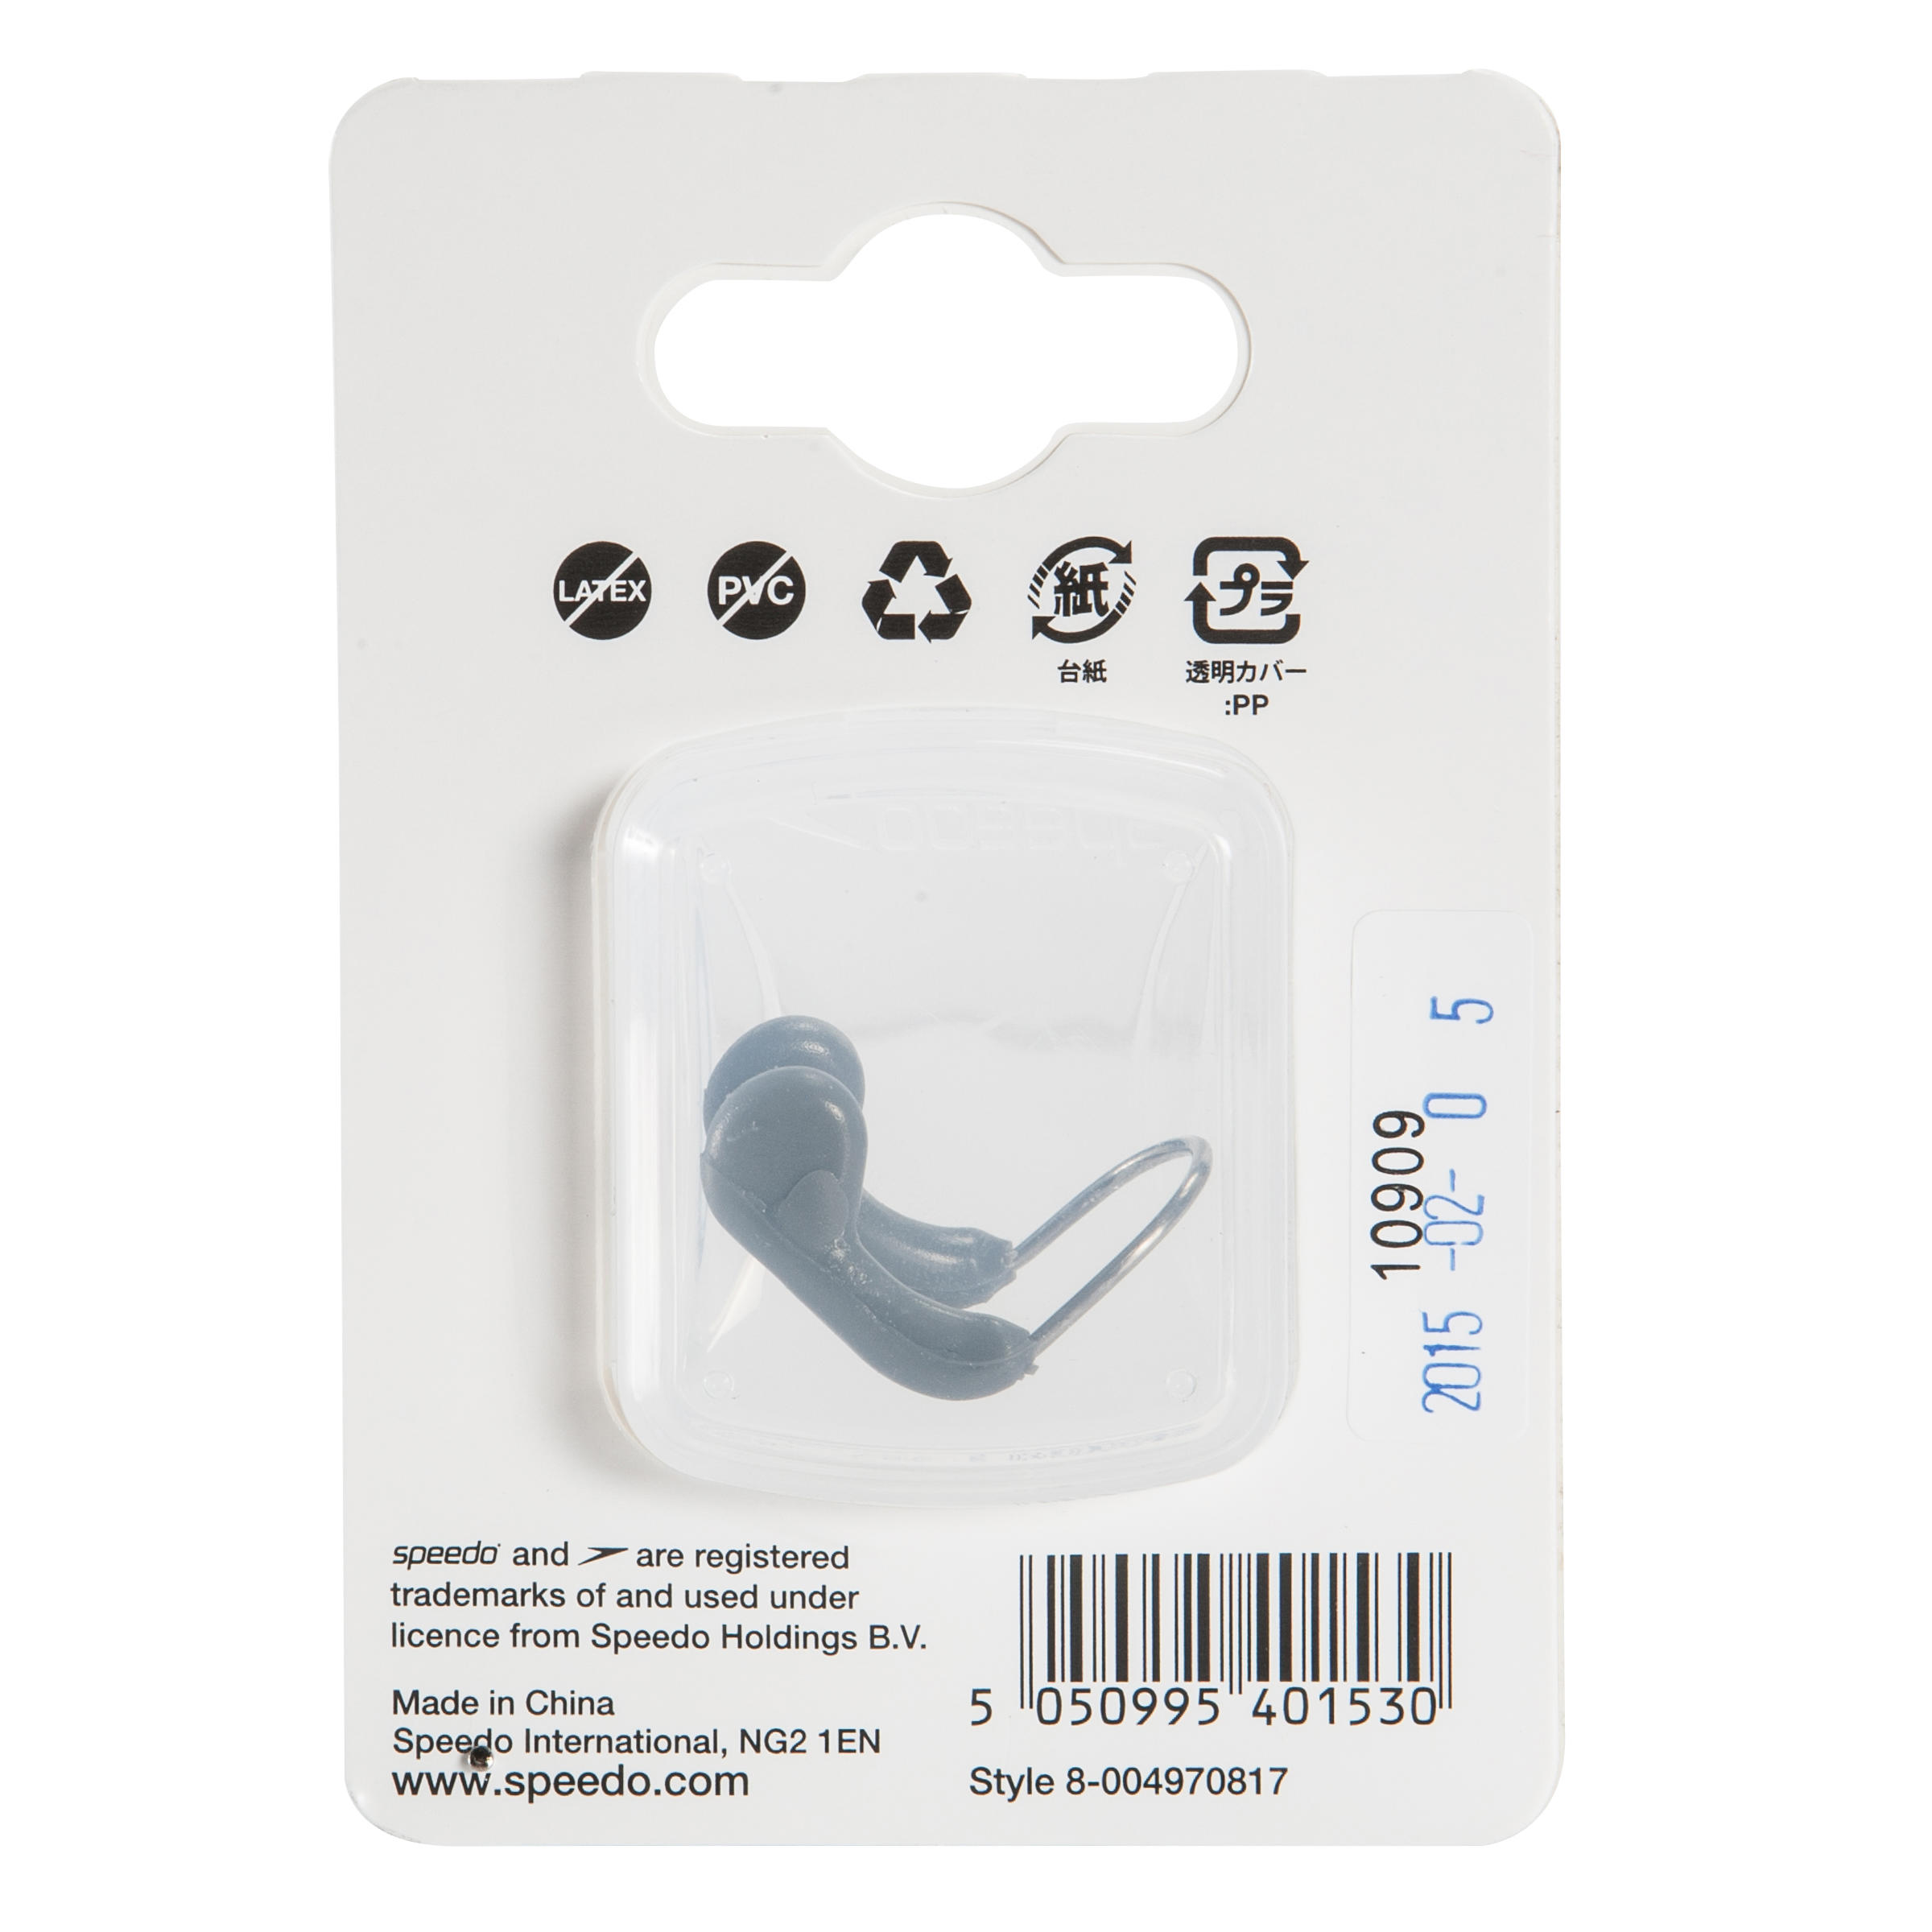 SPEEDO COMPETITION NOSE CLIP - GREY BLUE 10/10